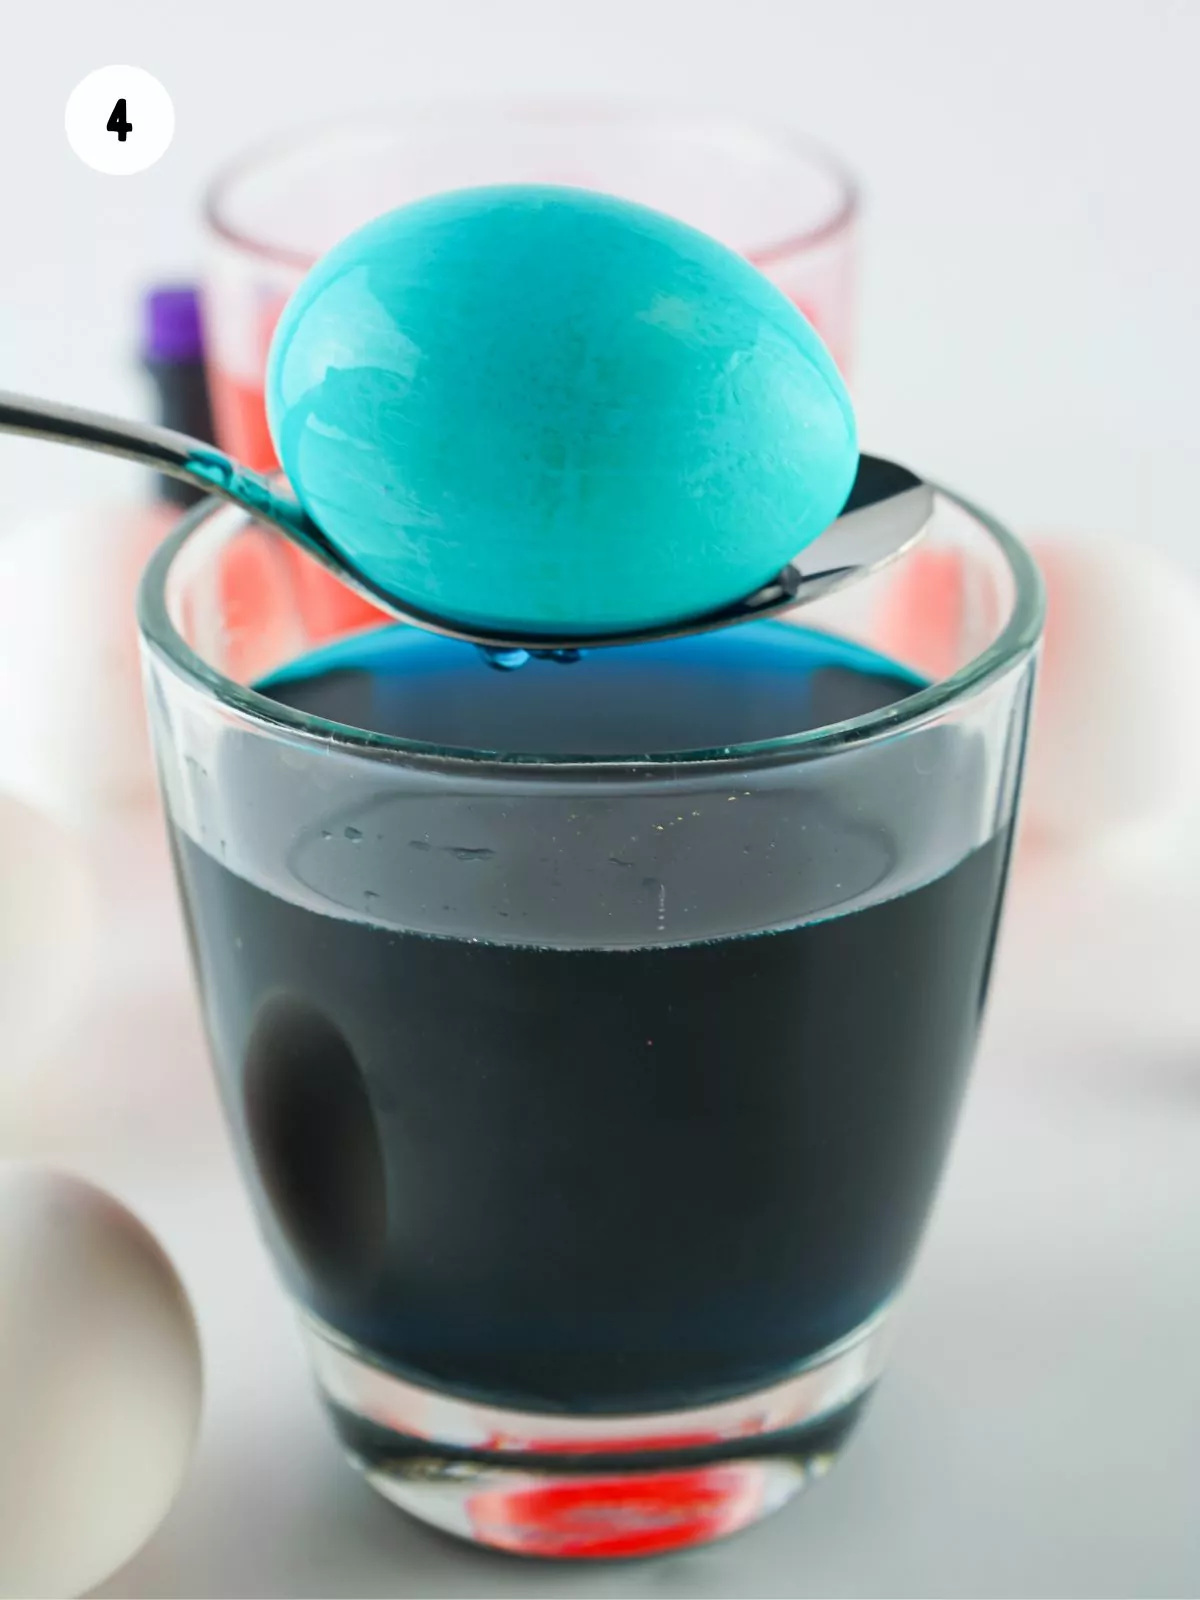 blue dyed egg on spoon being held over a glass of blue colored water.